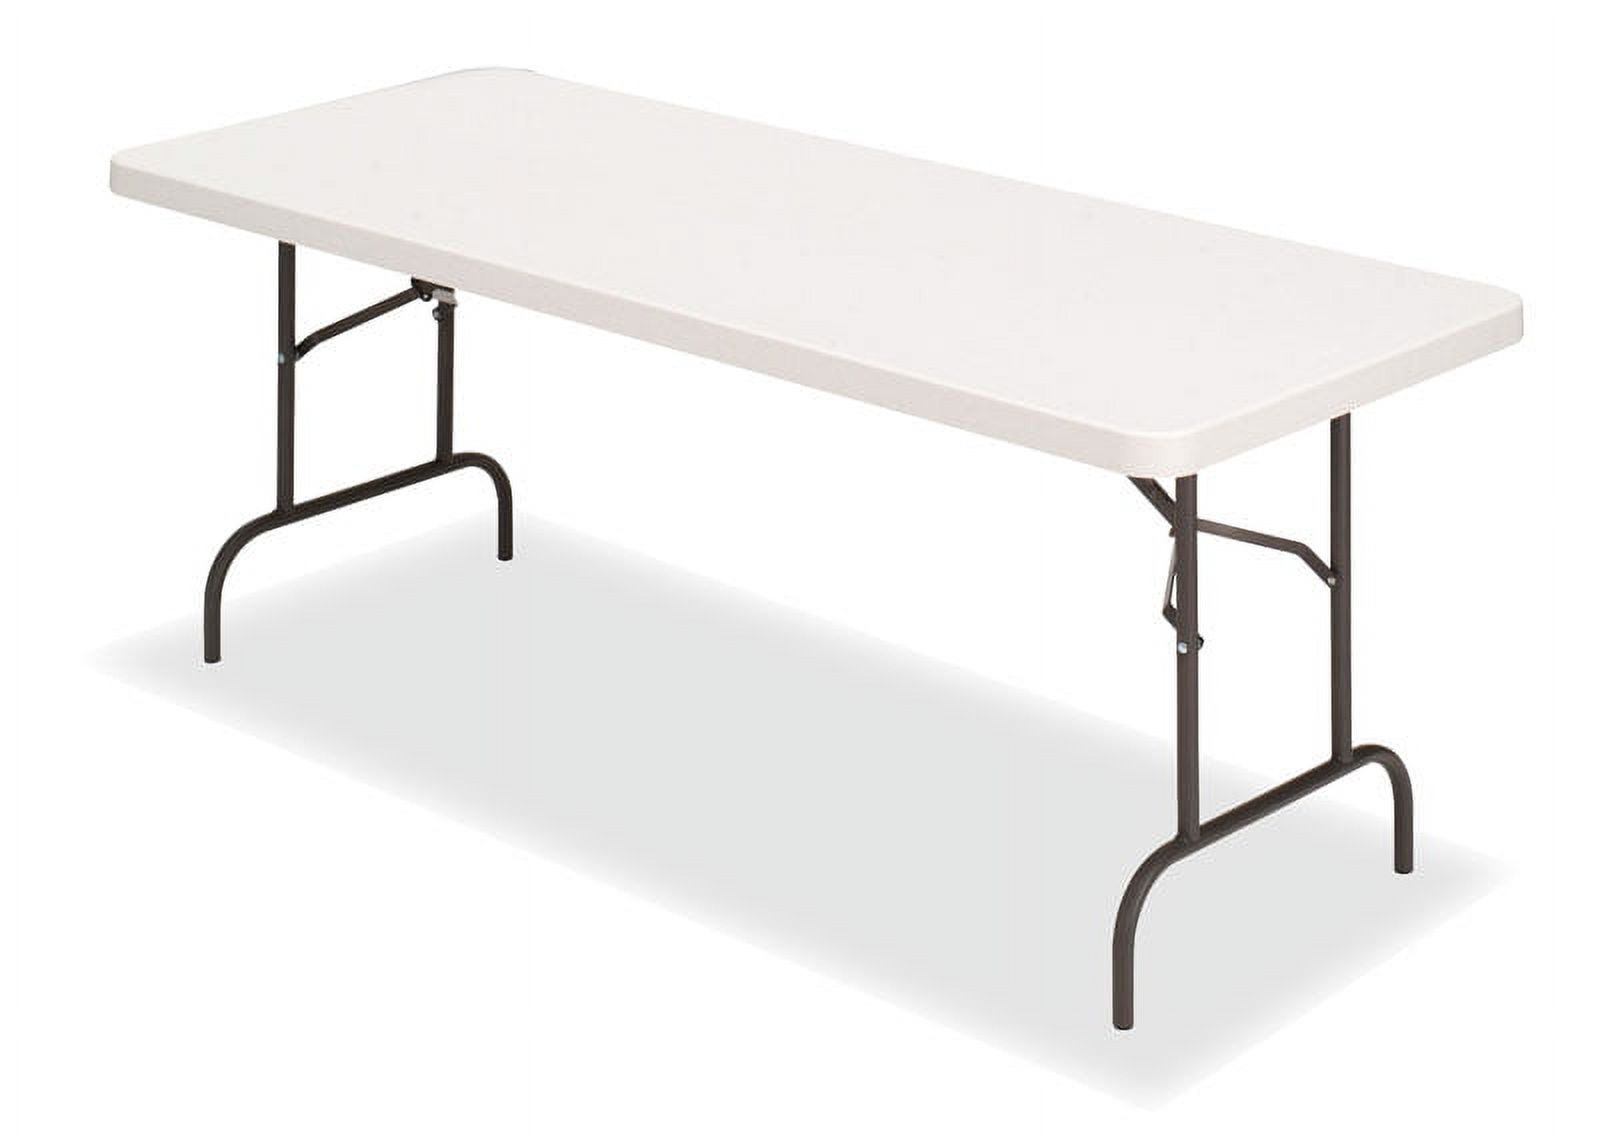 Iceberg 65513 30 x 60 in. IndestrucTable 500 Series Too Folding Table, Platinum